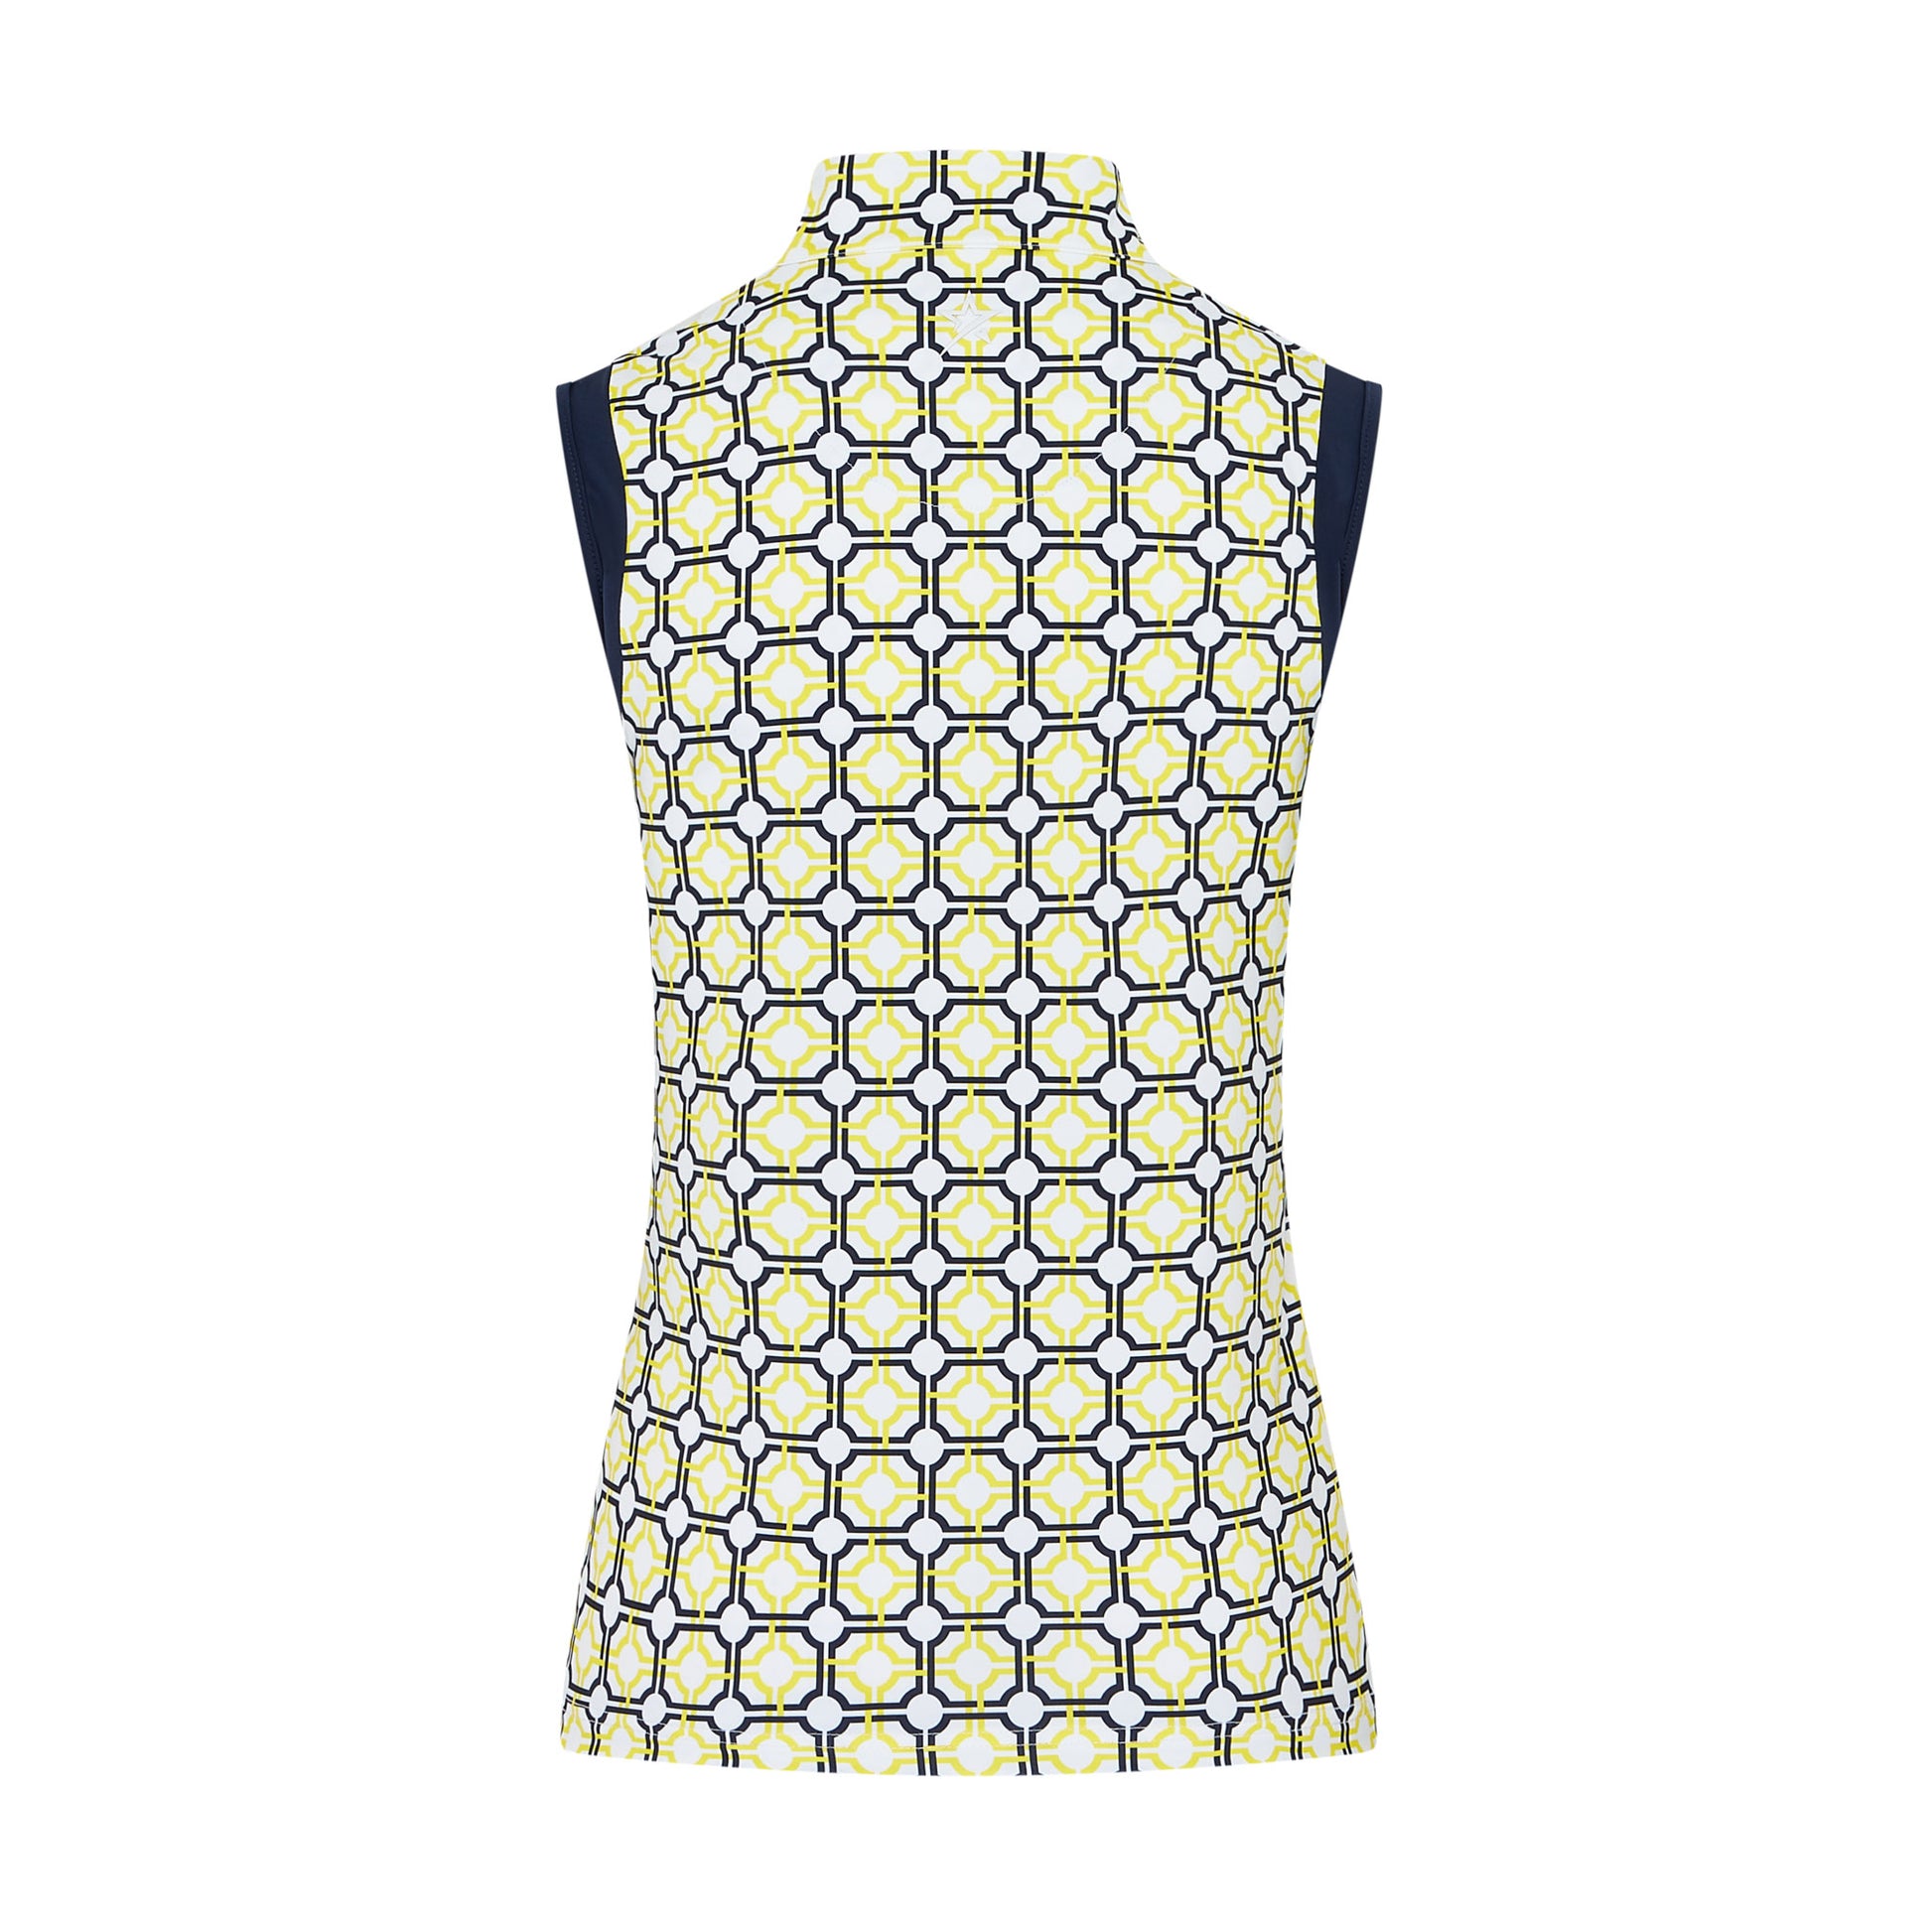 Swing Out Sister Women's Sleeveless Zip-Neck Polo in Sunshine and Navy Mosaic Pattern